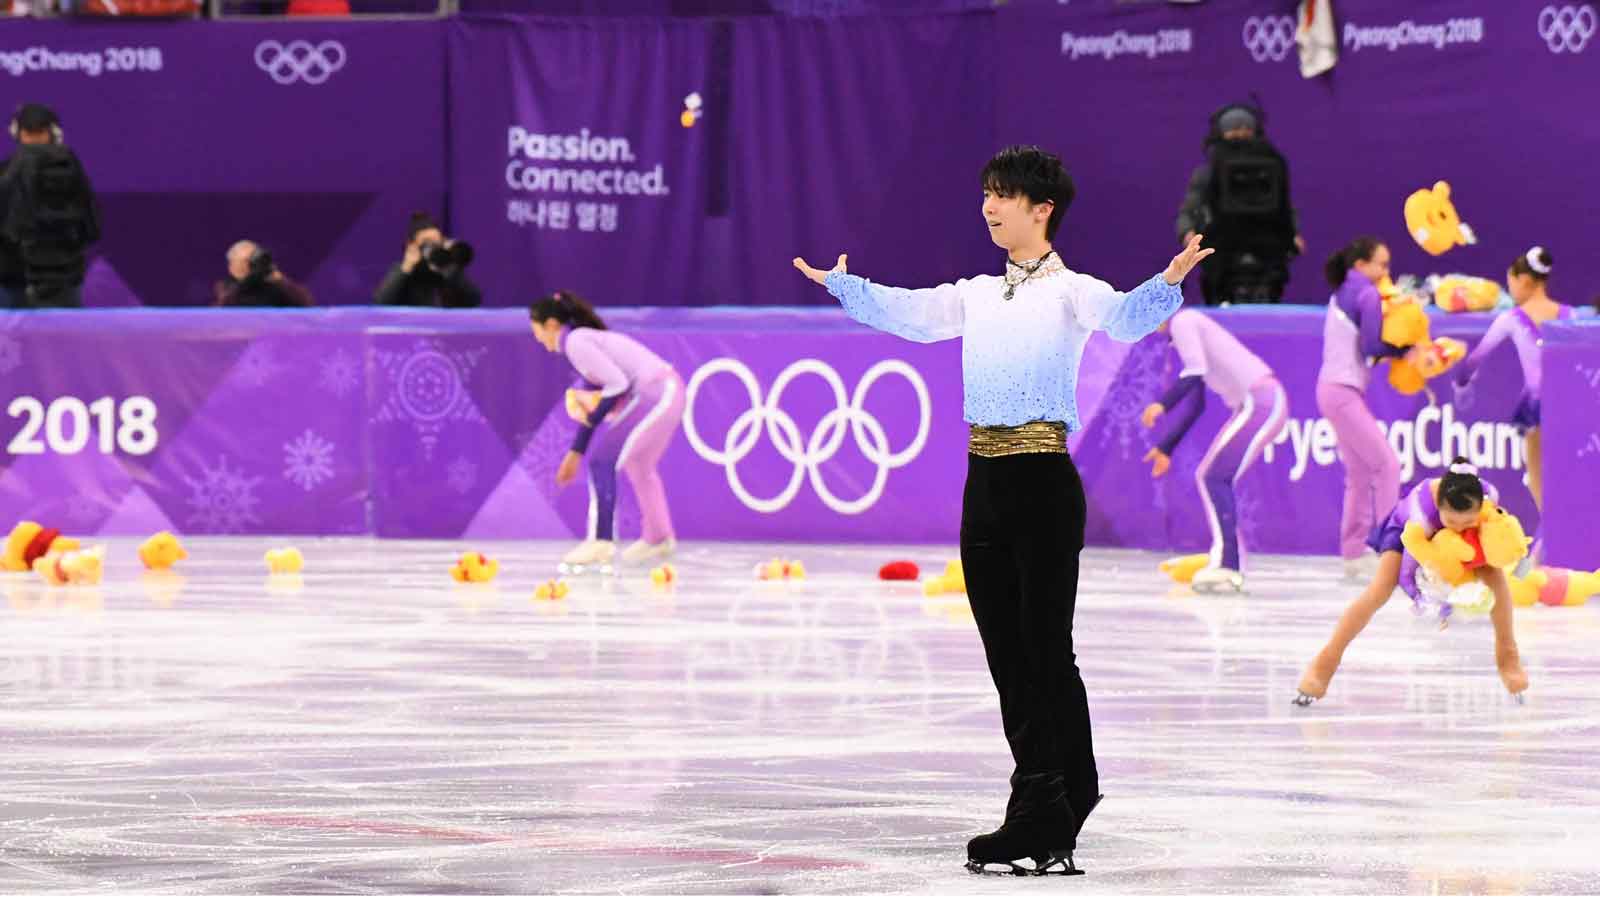 Ever Wonder Why Fans Throw Stuffed Animals Onto the Ice After a Figure Skating Routine?